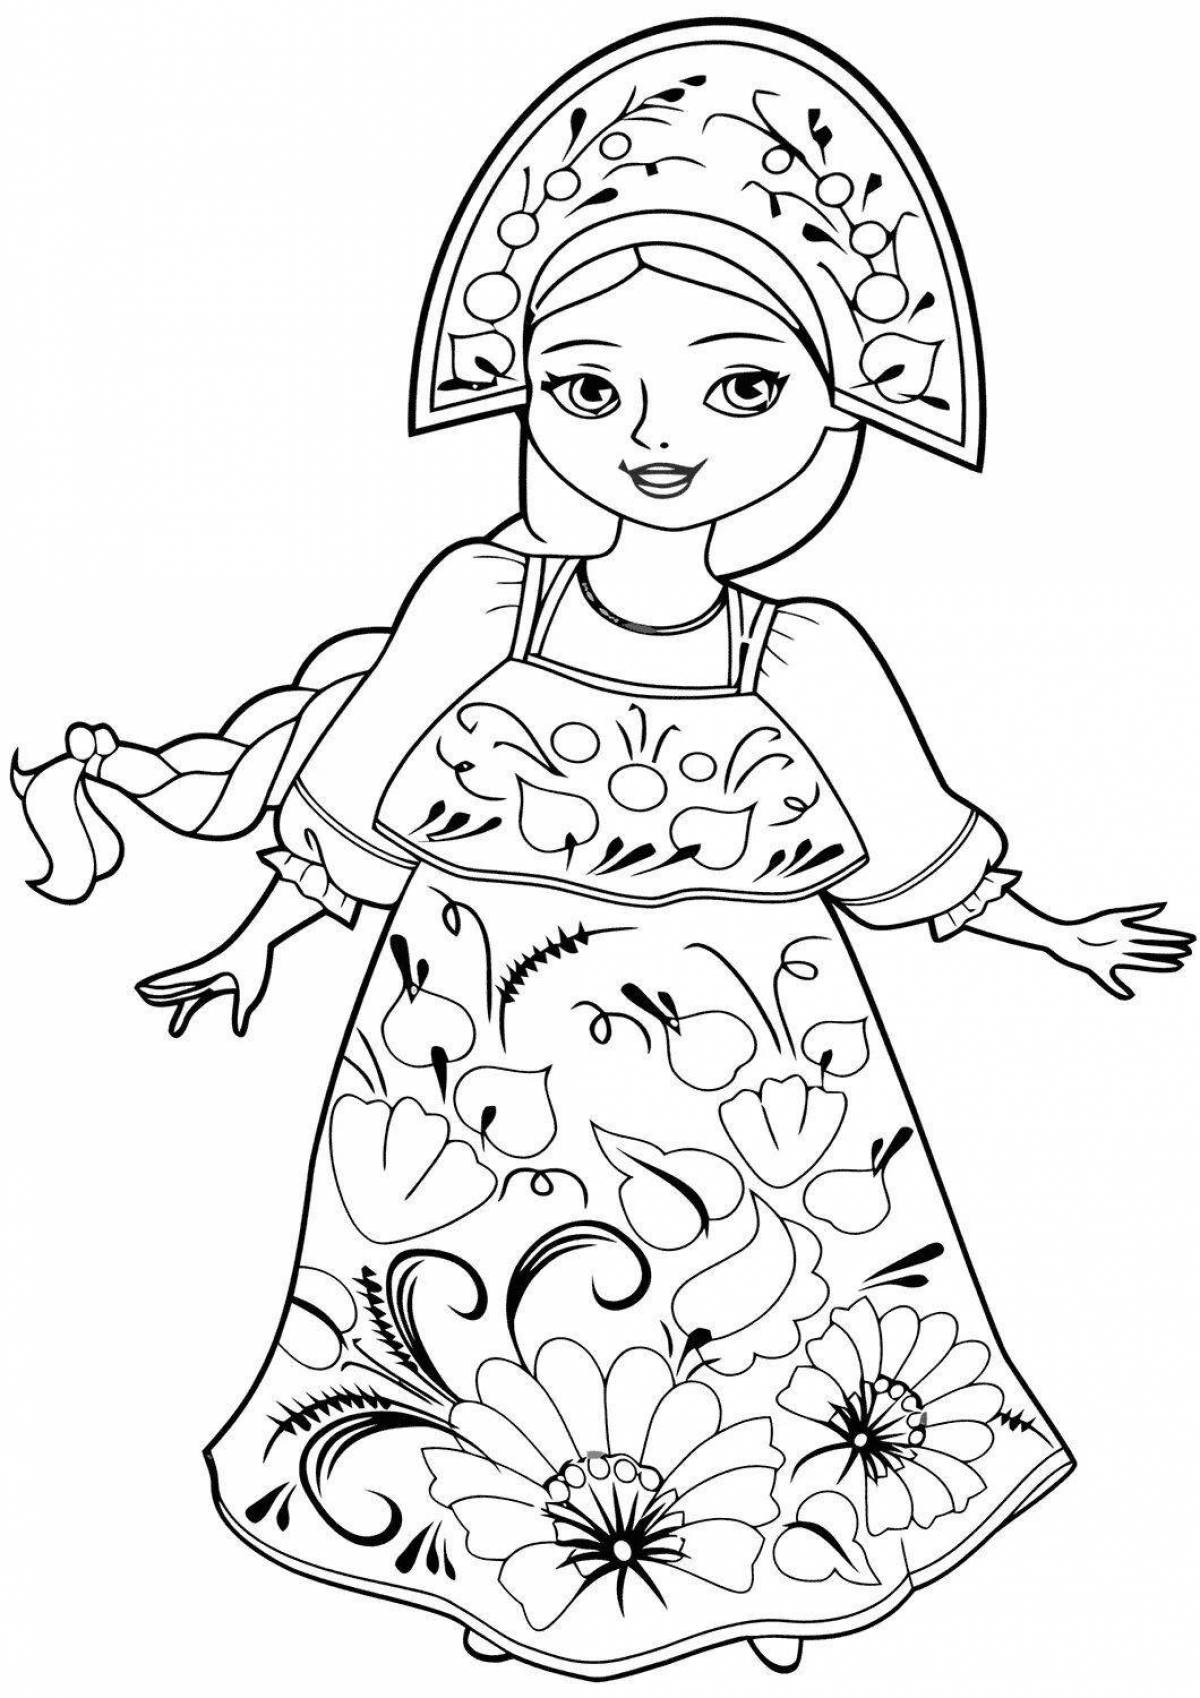 Coloring page gorgeous russian girl